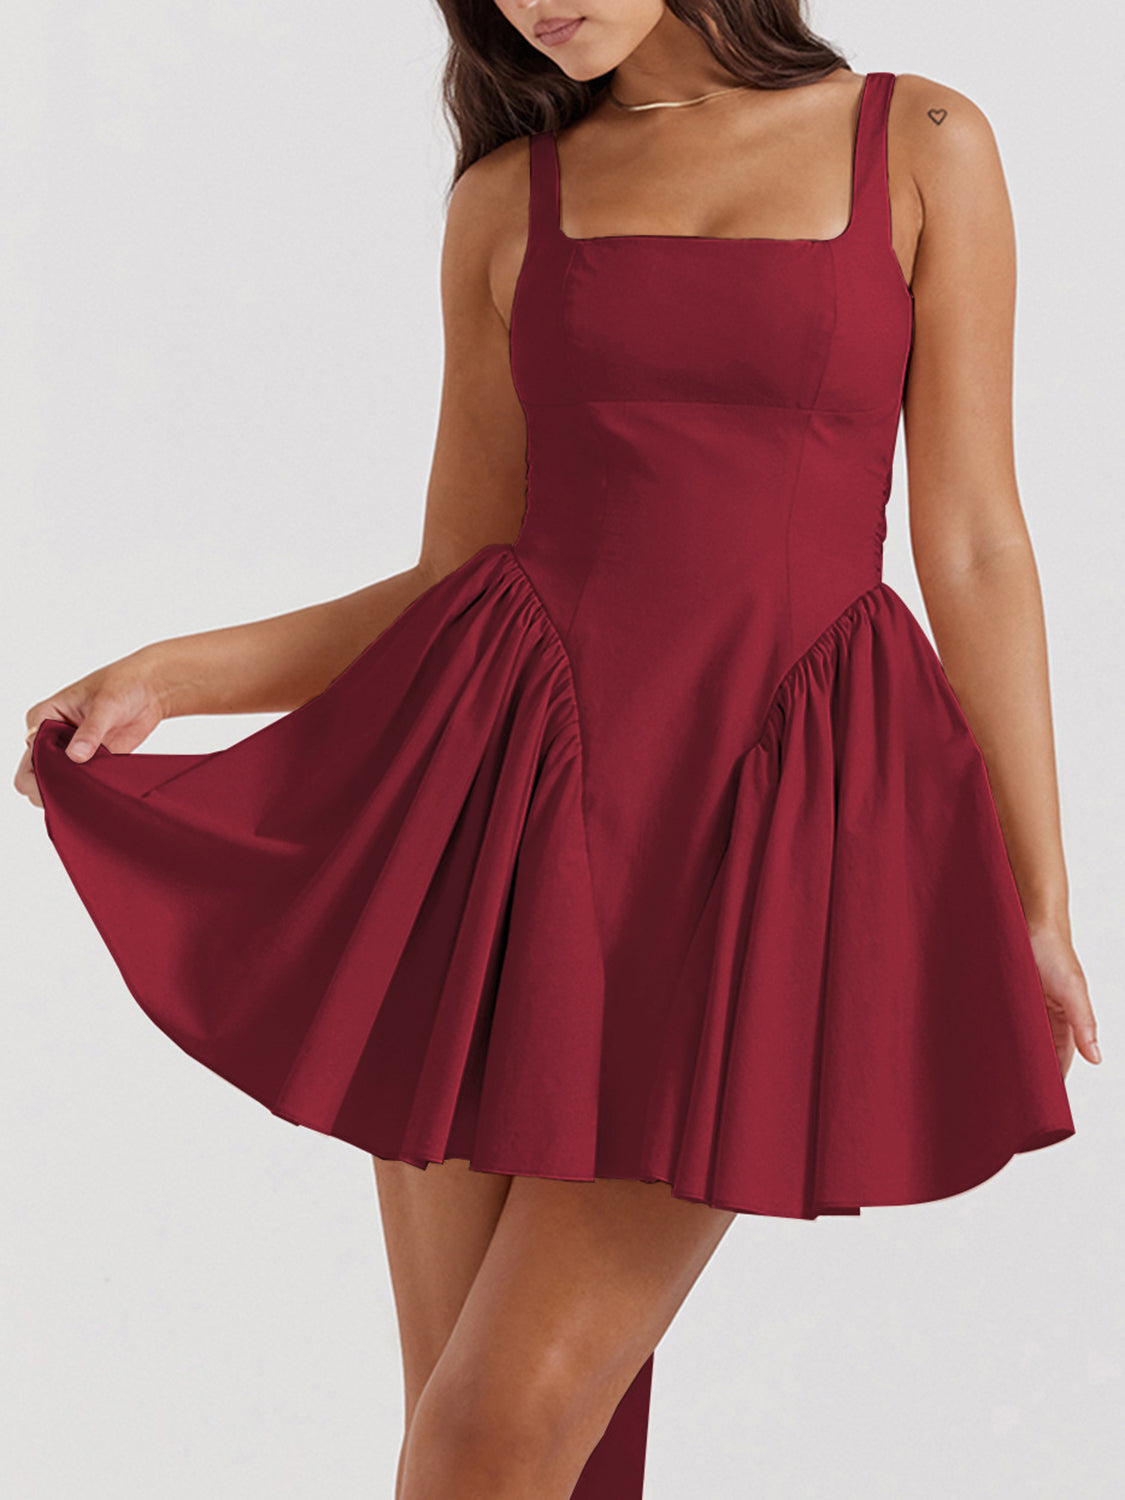 red dress, red dresses, casual dresses, nice clothes, backless dresses, new fashion, trending fashion, popular clothes, cute clothes, nice clothes, outfit  ideas, kesley boutique, kesley fashion, nice clothes, cute dresses, date night outfit ideas, spring fashion, summer dresses, vacation dress, vacation clothes, puffy skirt dress, new women's fashion, trending fashion, instagram shop